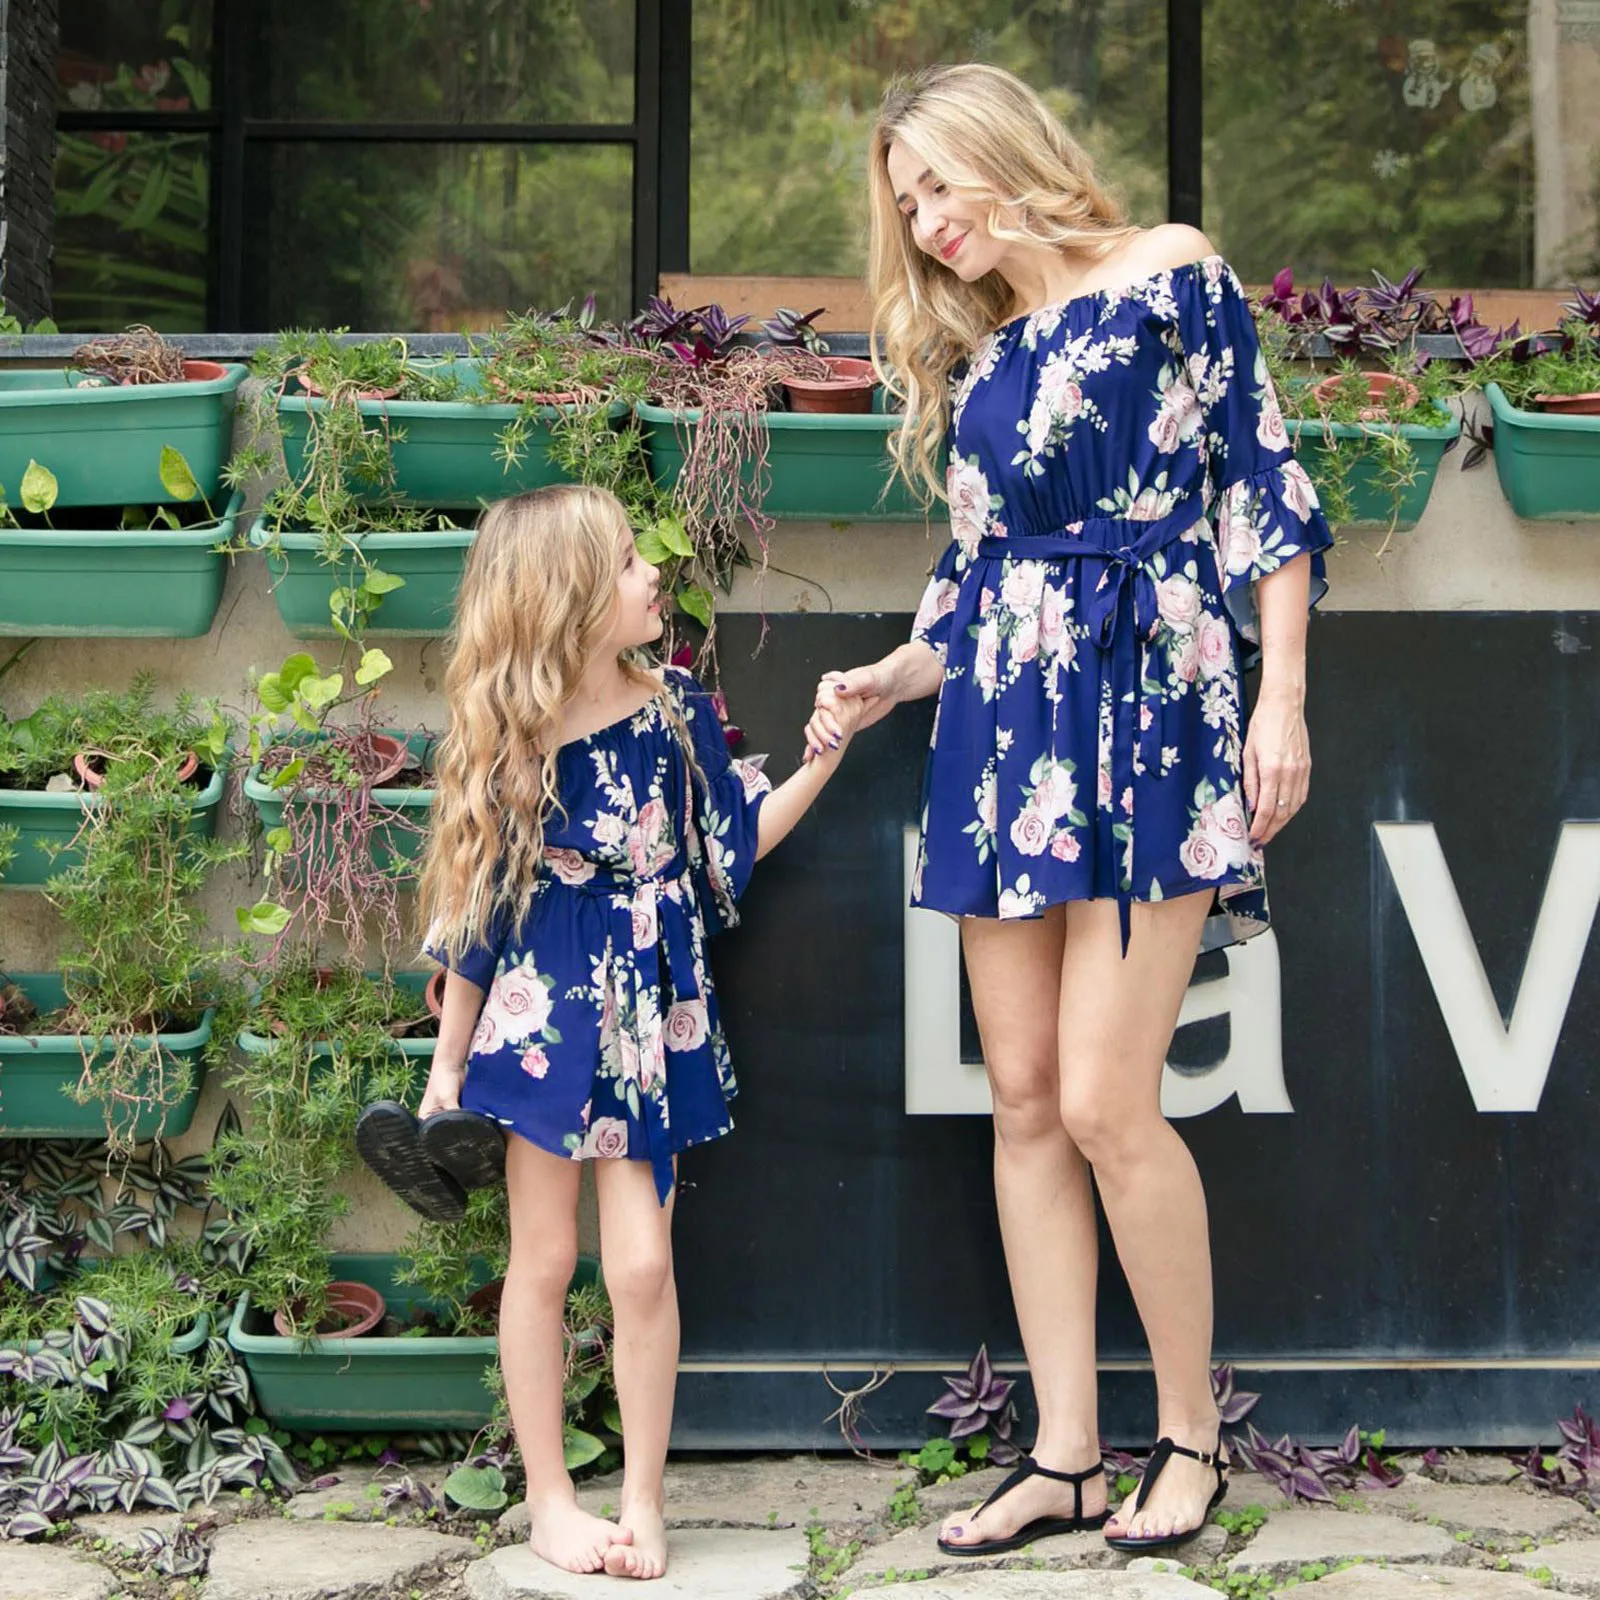 
2020 new European and American explosion models mother and daughter parent-child dress word shoulder print ruffle dress 